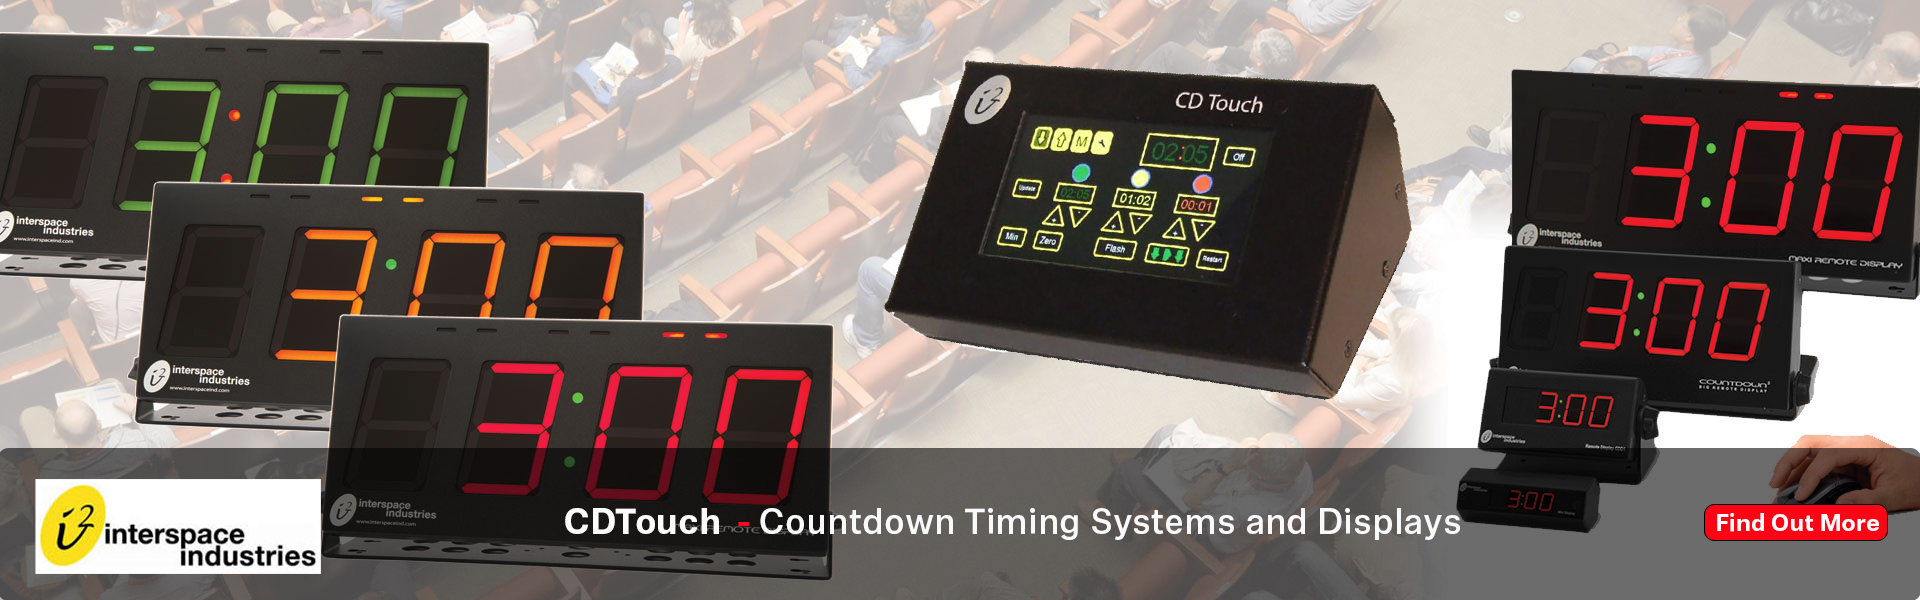 Interspace CDTouch CountDown Timing System and Displays